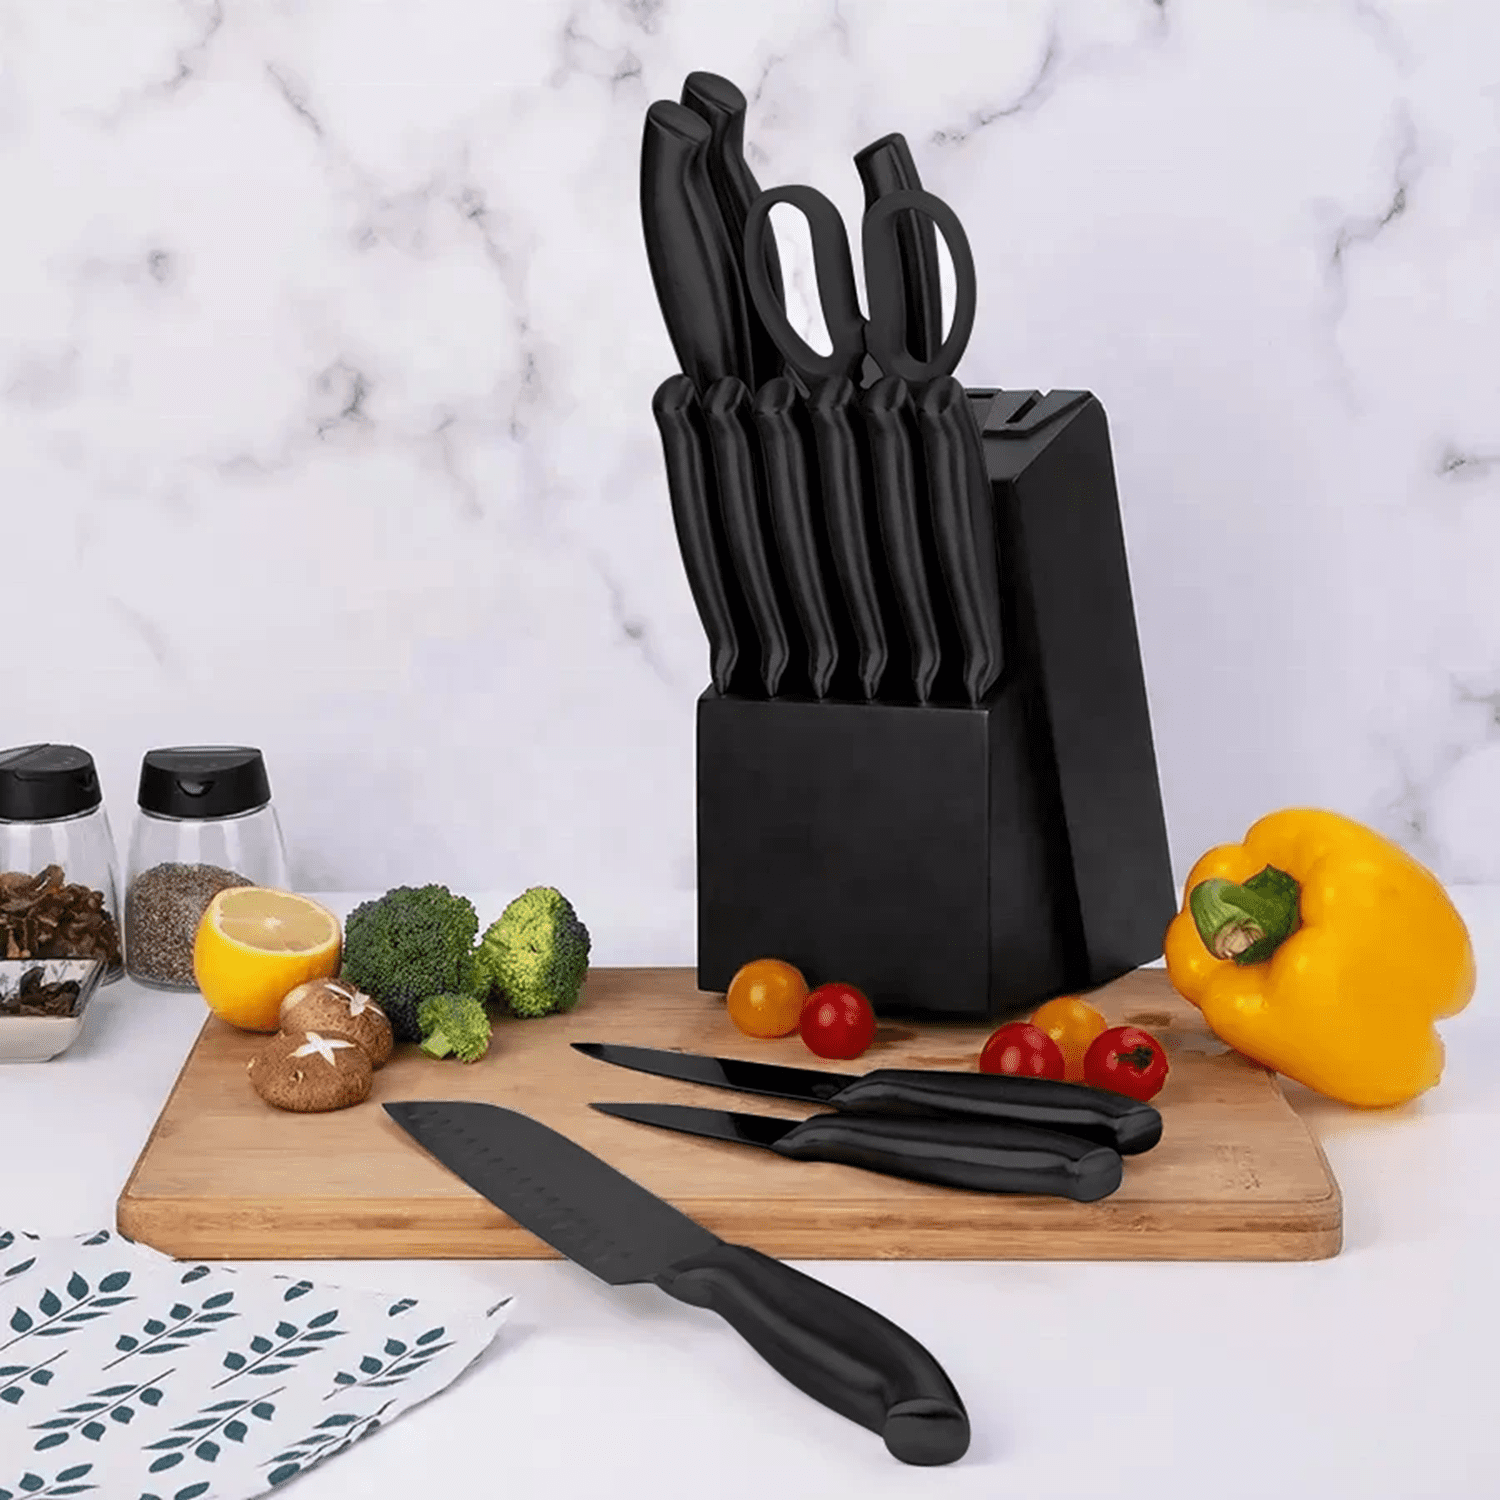 EVERRICH All-In-One Stainless Steel Knife Set